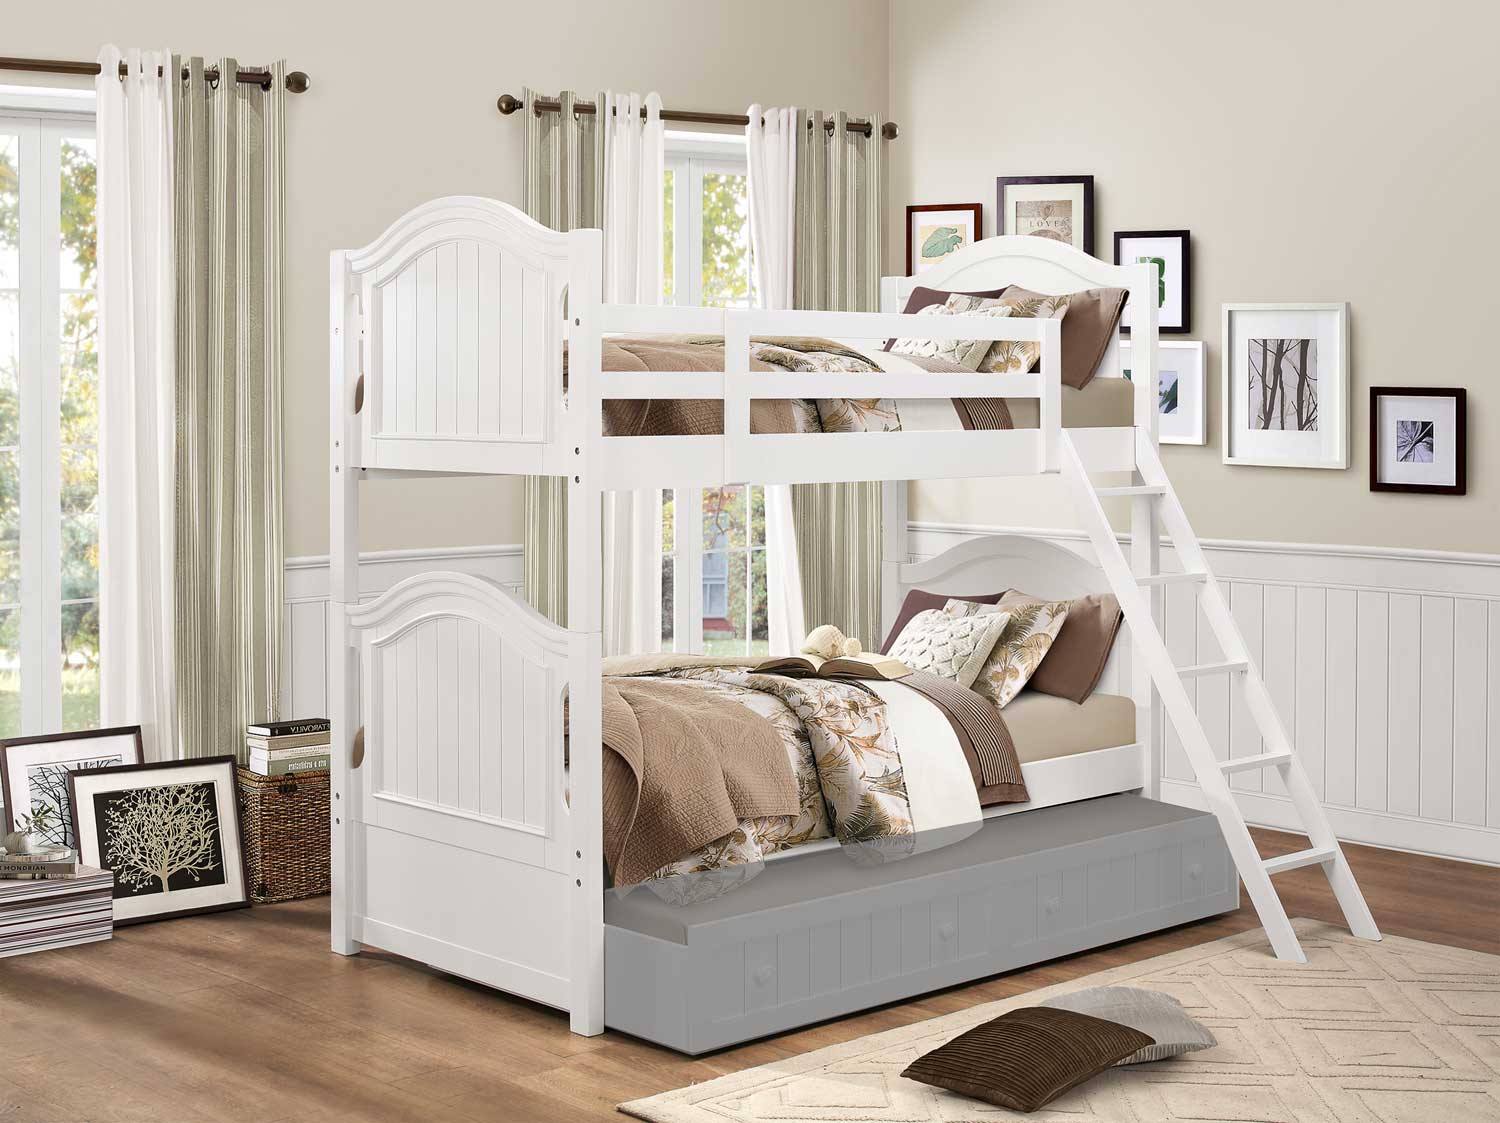 Homelegance Clementine Twin/Twin Bunk Bed - White